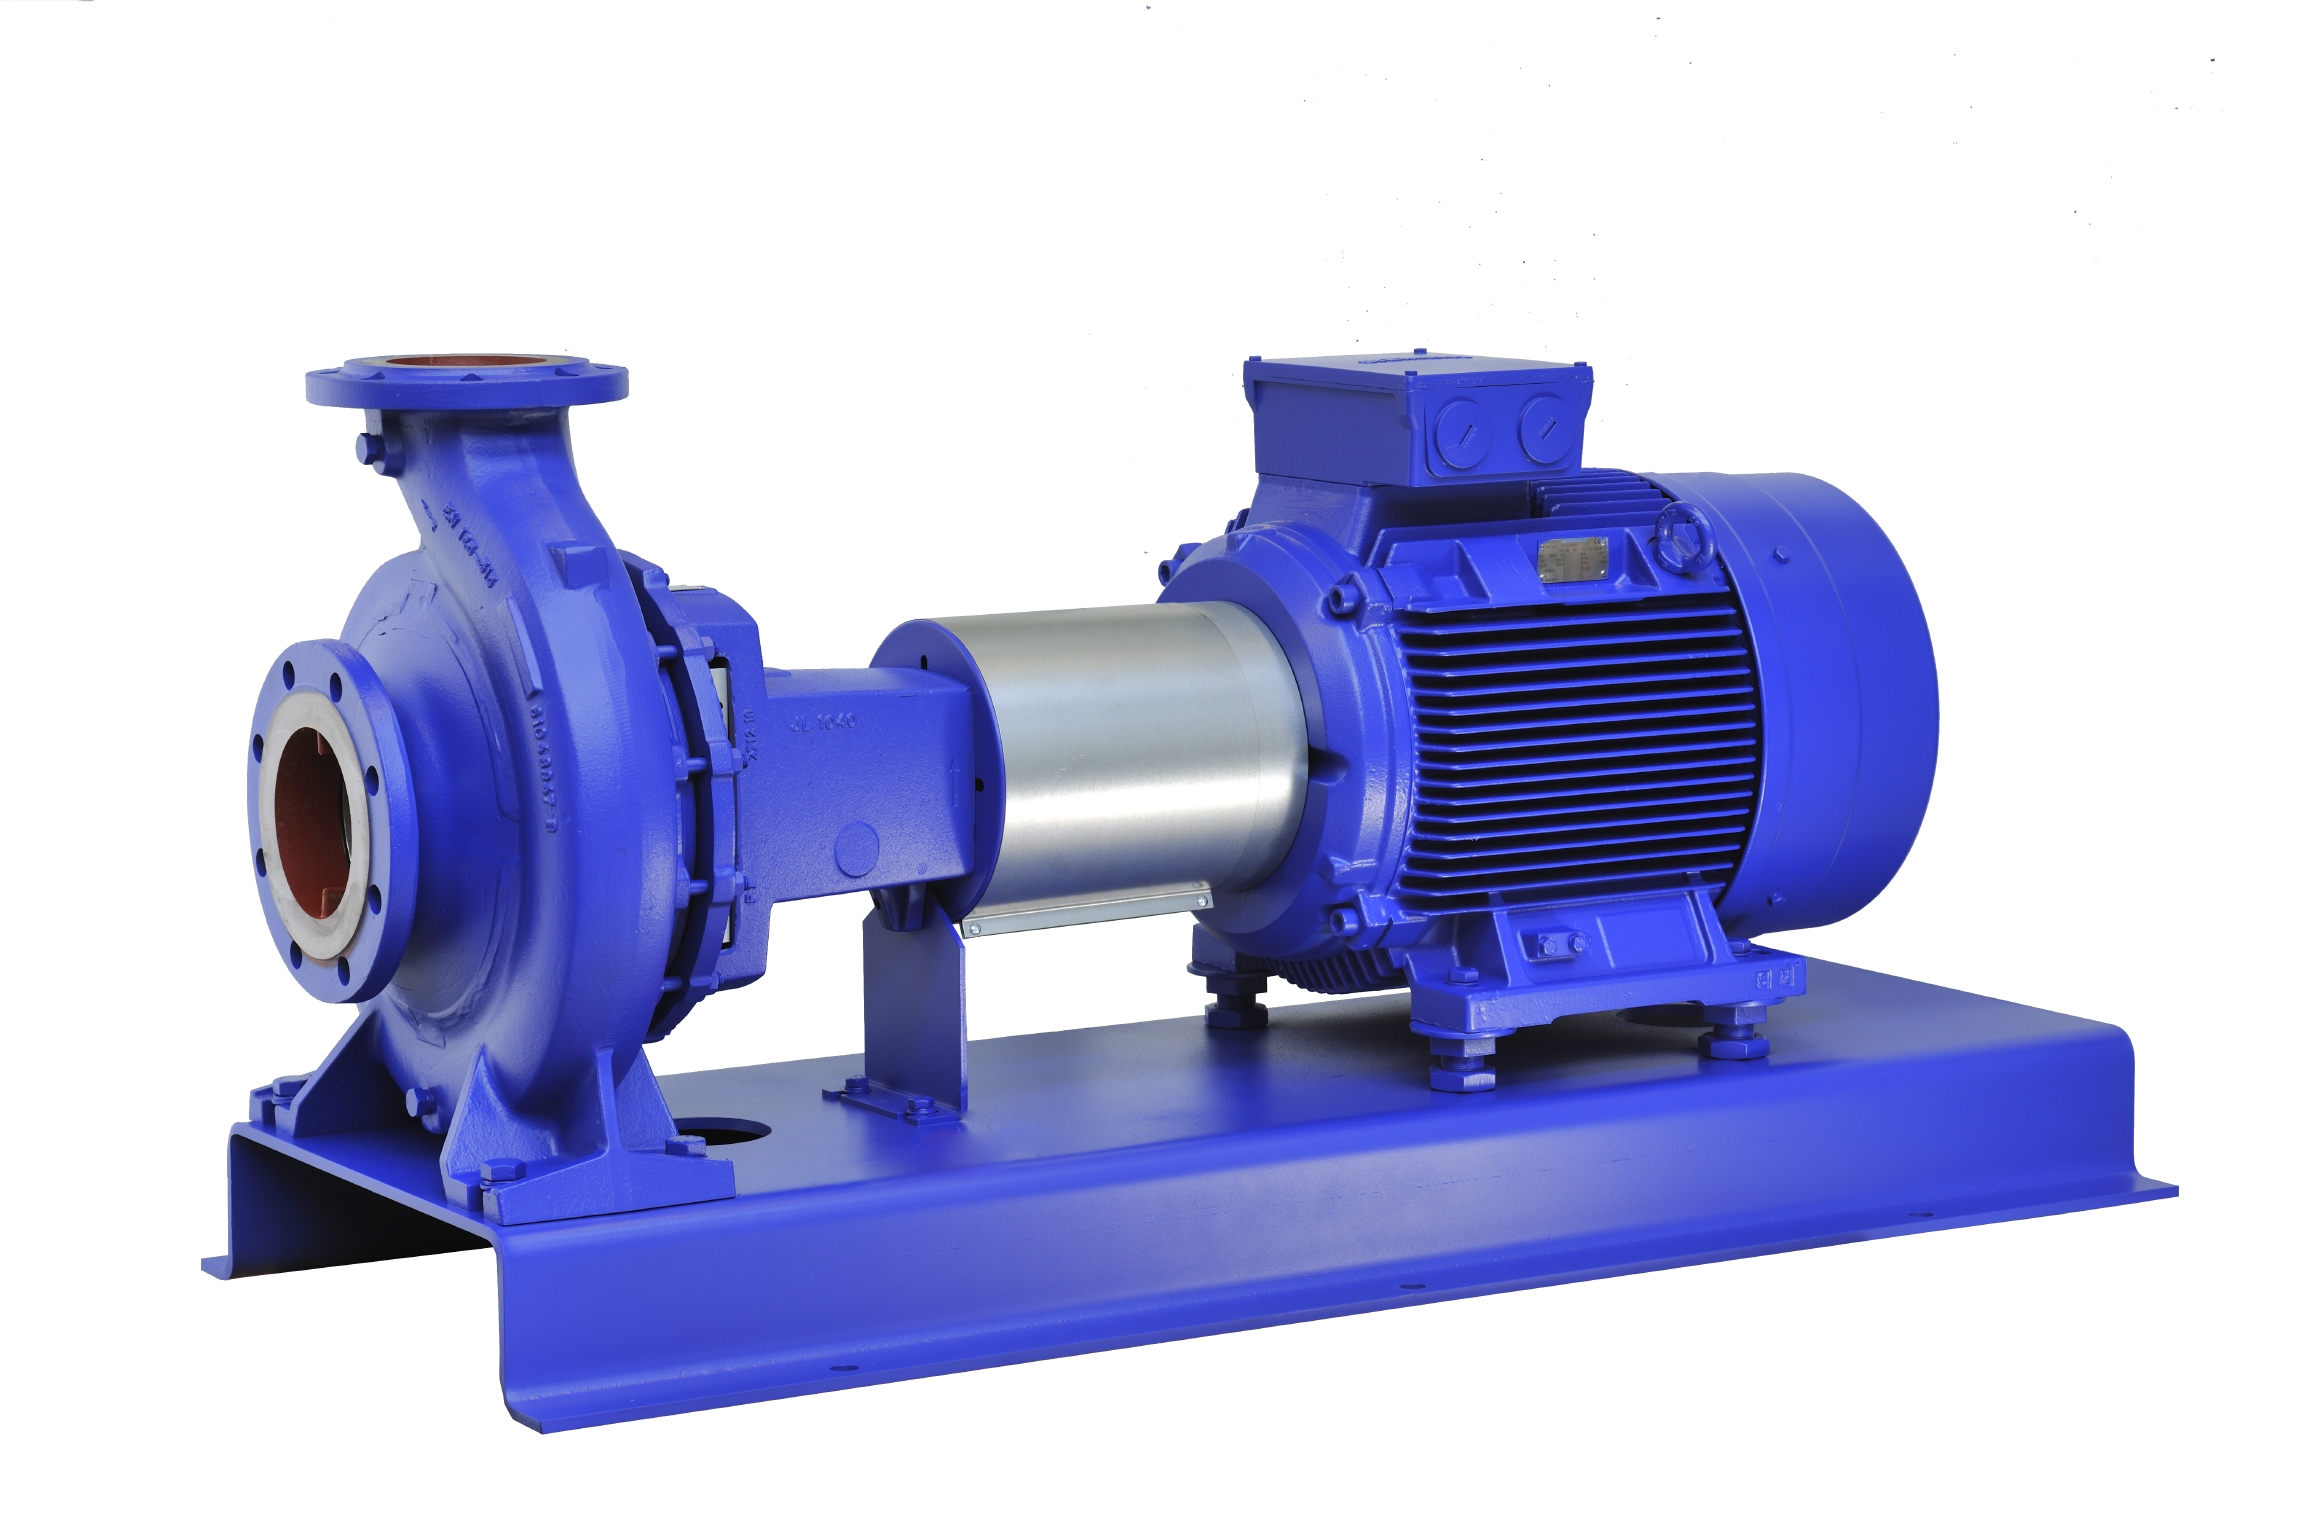 C-Way Engg Exports is a leading supplier and exporters of high quality Industrial Centrifugal Pump.